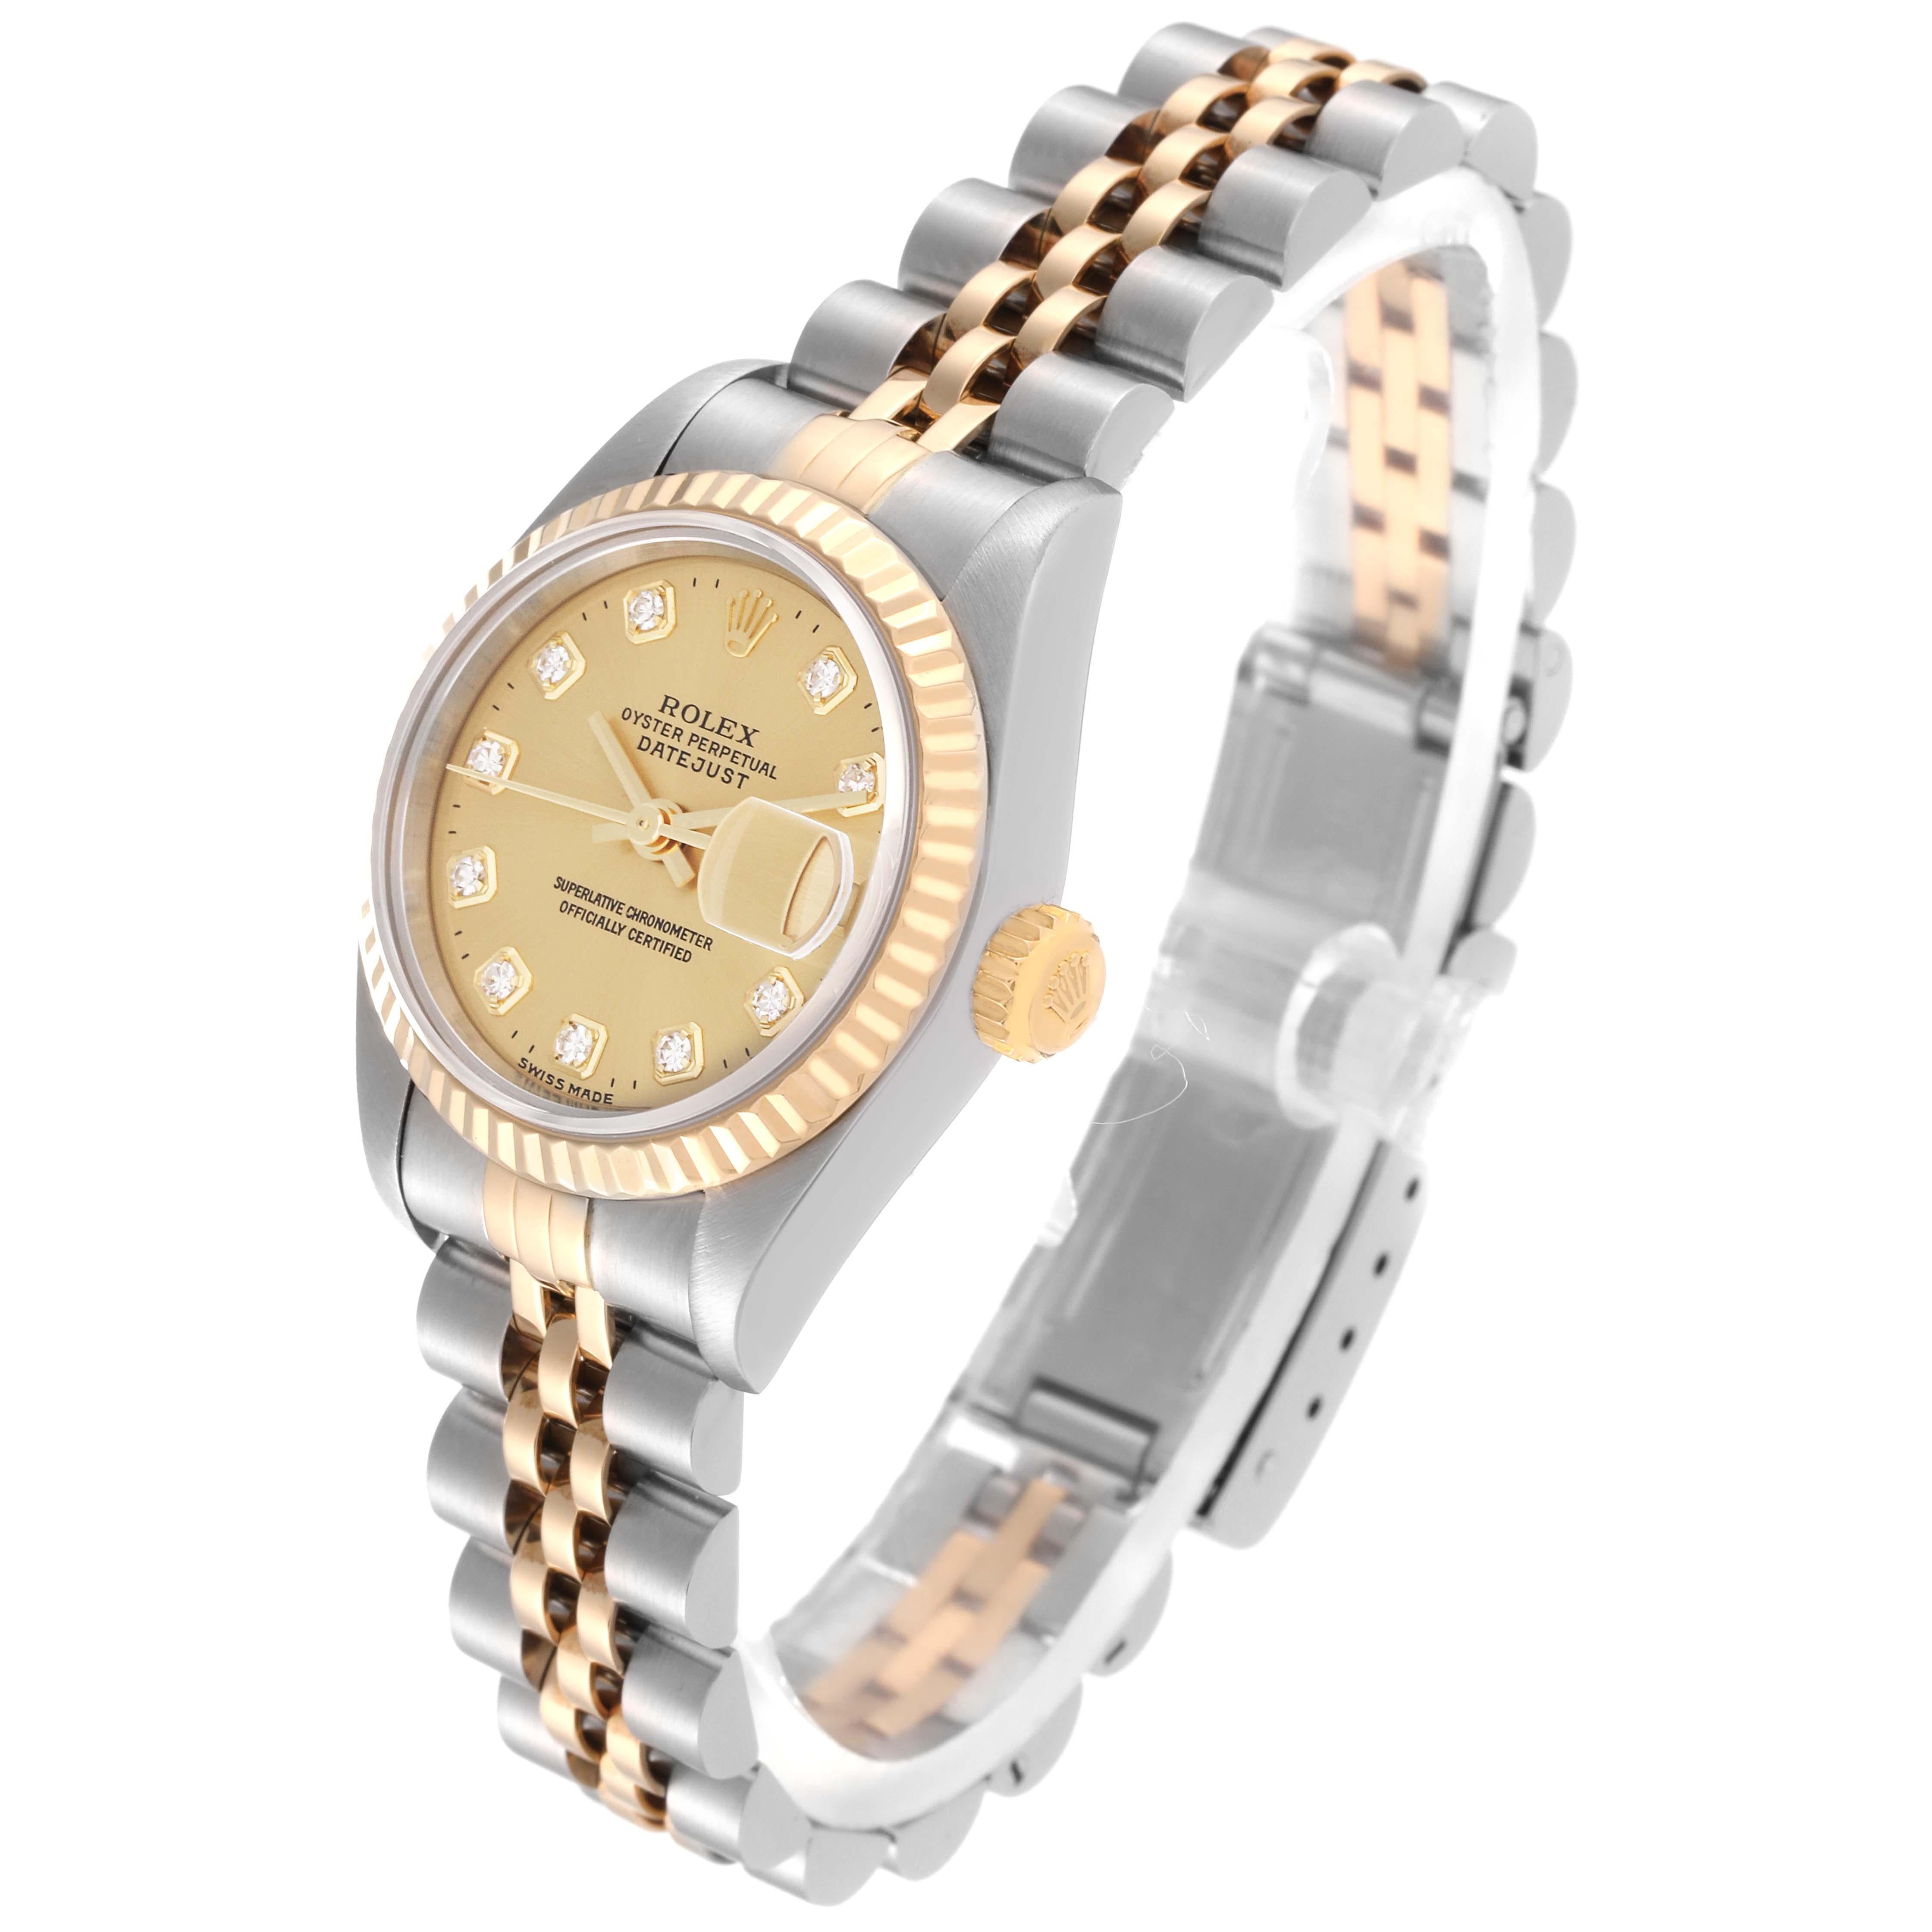 Rolex Datejust Diamond Dial Steel Yellow Gold Ladies Watch 69173 Box Papers 8